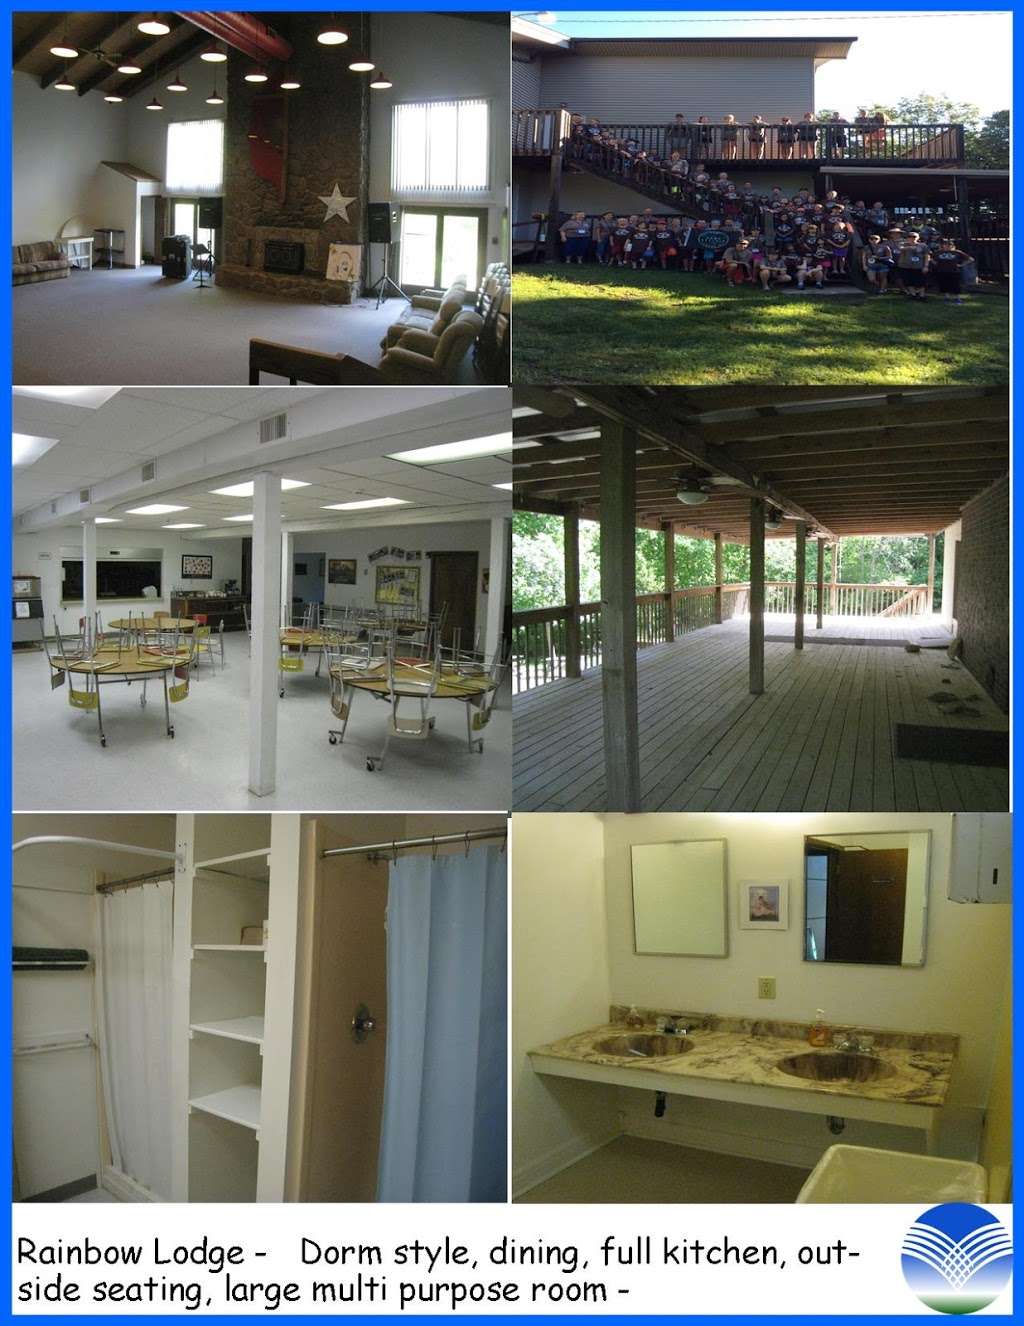 Wilderness Camping and Retreat Center | 34030 W 204th St, Lawson, MO 64062, USA | Phone: (816) 826-8373